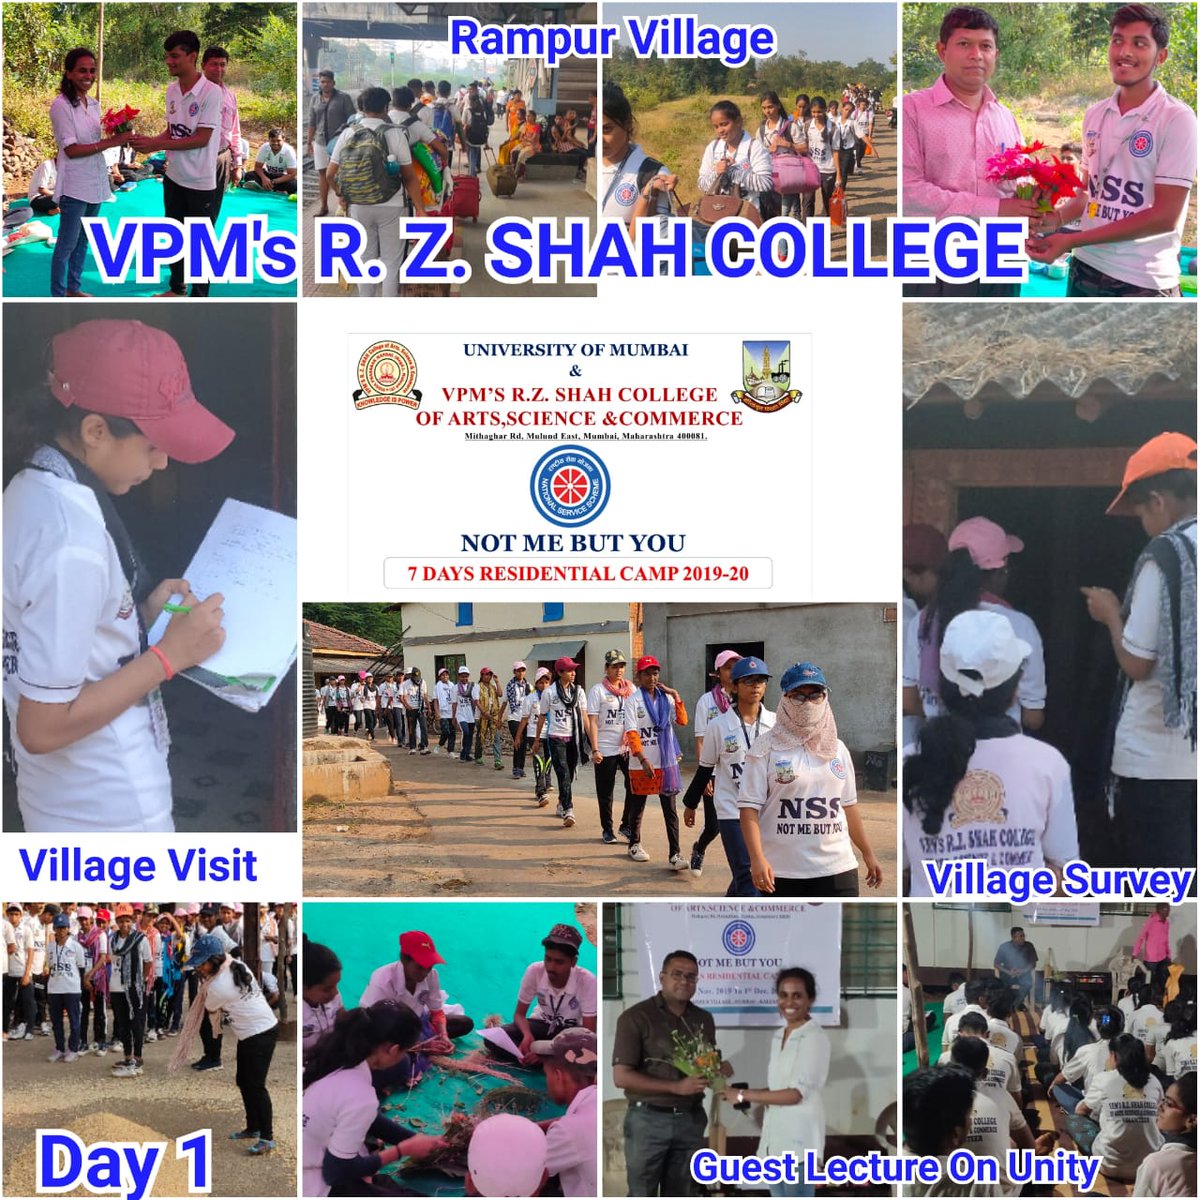 NSS UNIT OF VPM's R Z SHAH COLLEGE Organised special residential camp for seven days.First day  was started with Cleanliness of Camp site. And Constitution day was also celebrated by conducting a session on Constitution.
#constitutionday2019 
@NaveliDeshmukh